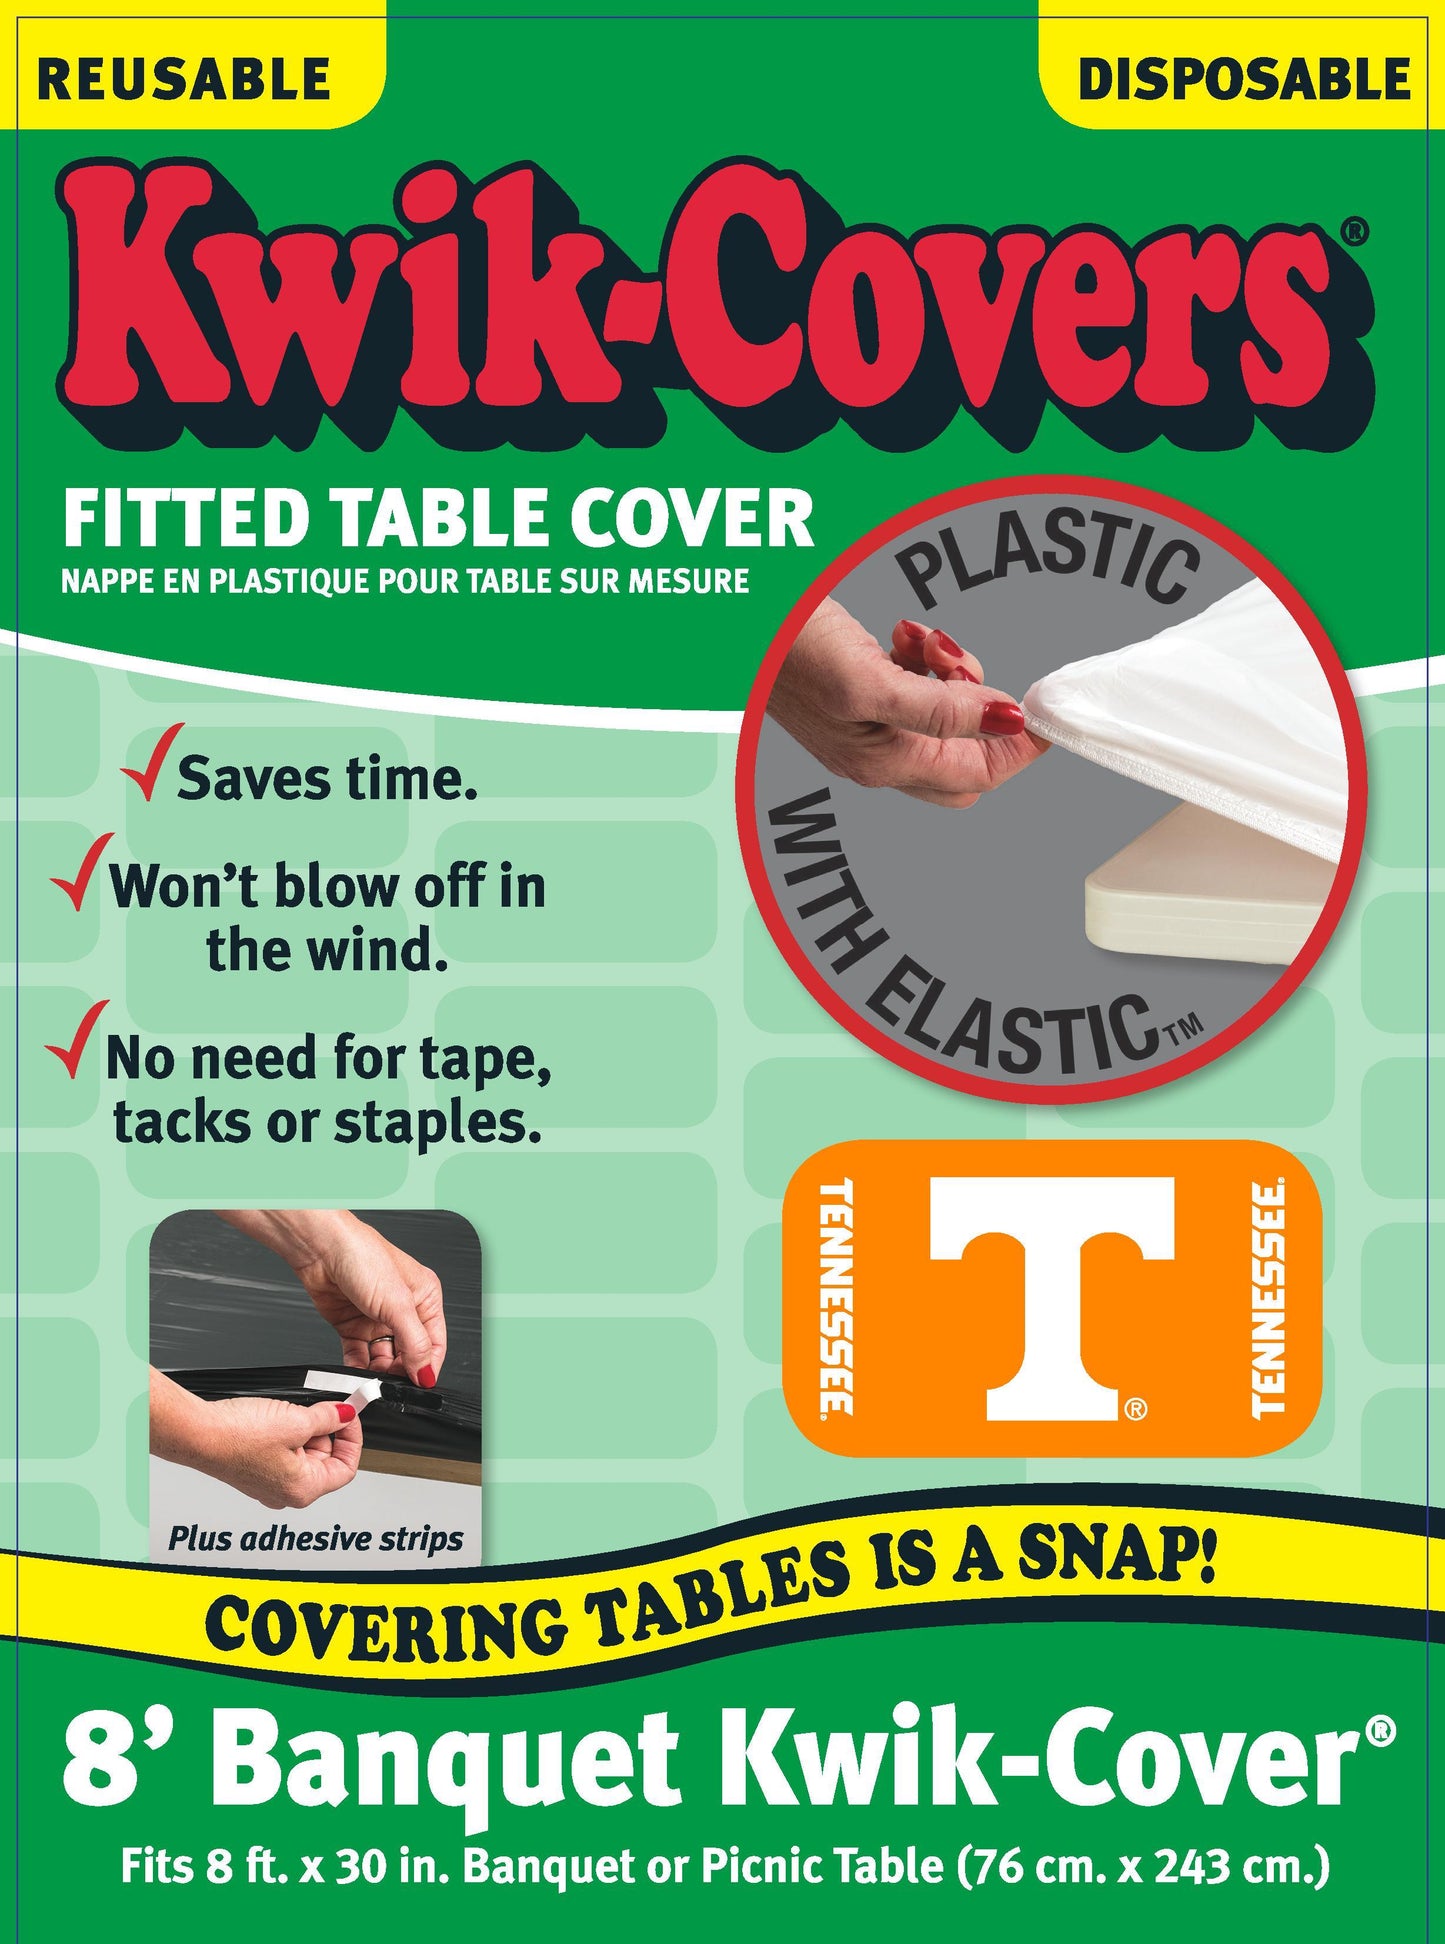 Collegiate Kwik-Covers Rectangle Plastic Table Cover (University of Tennessee)